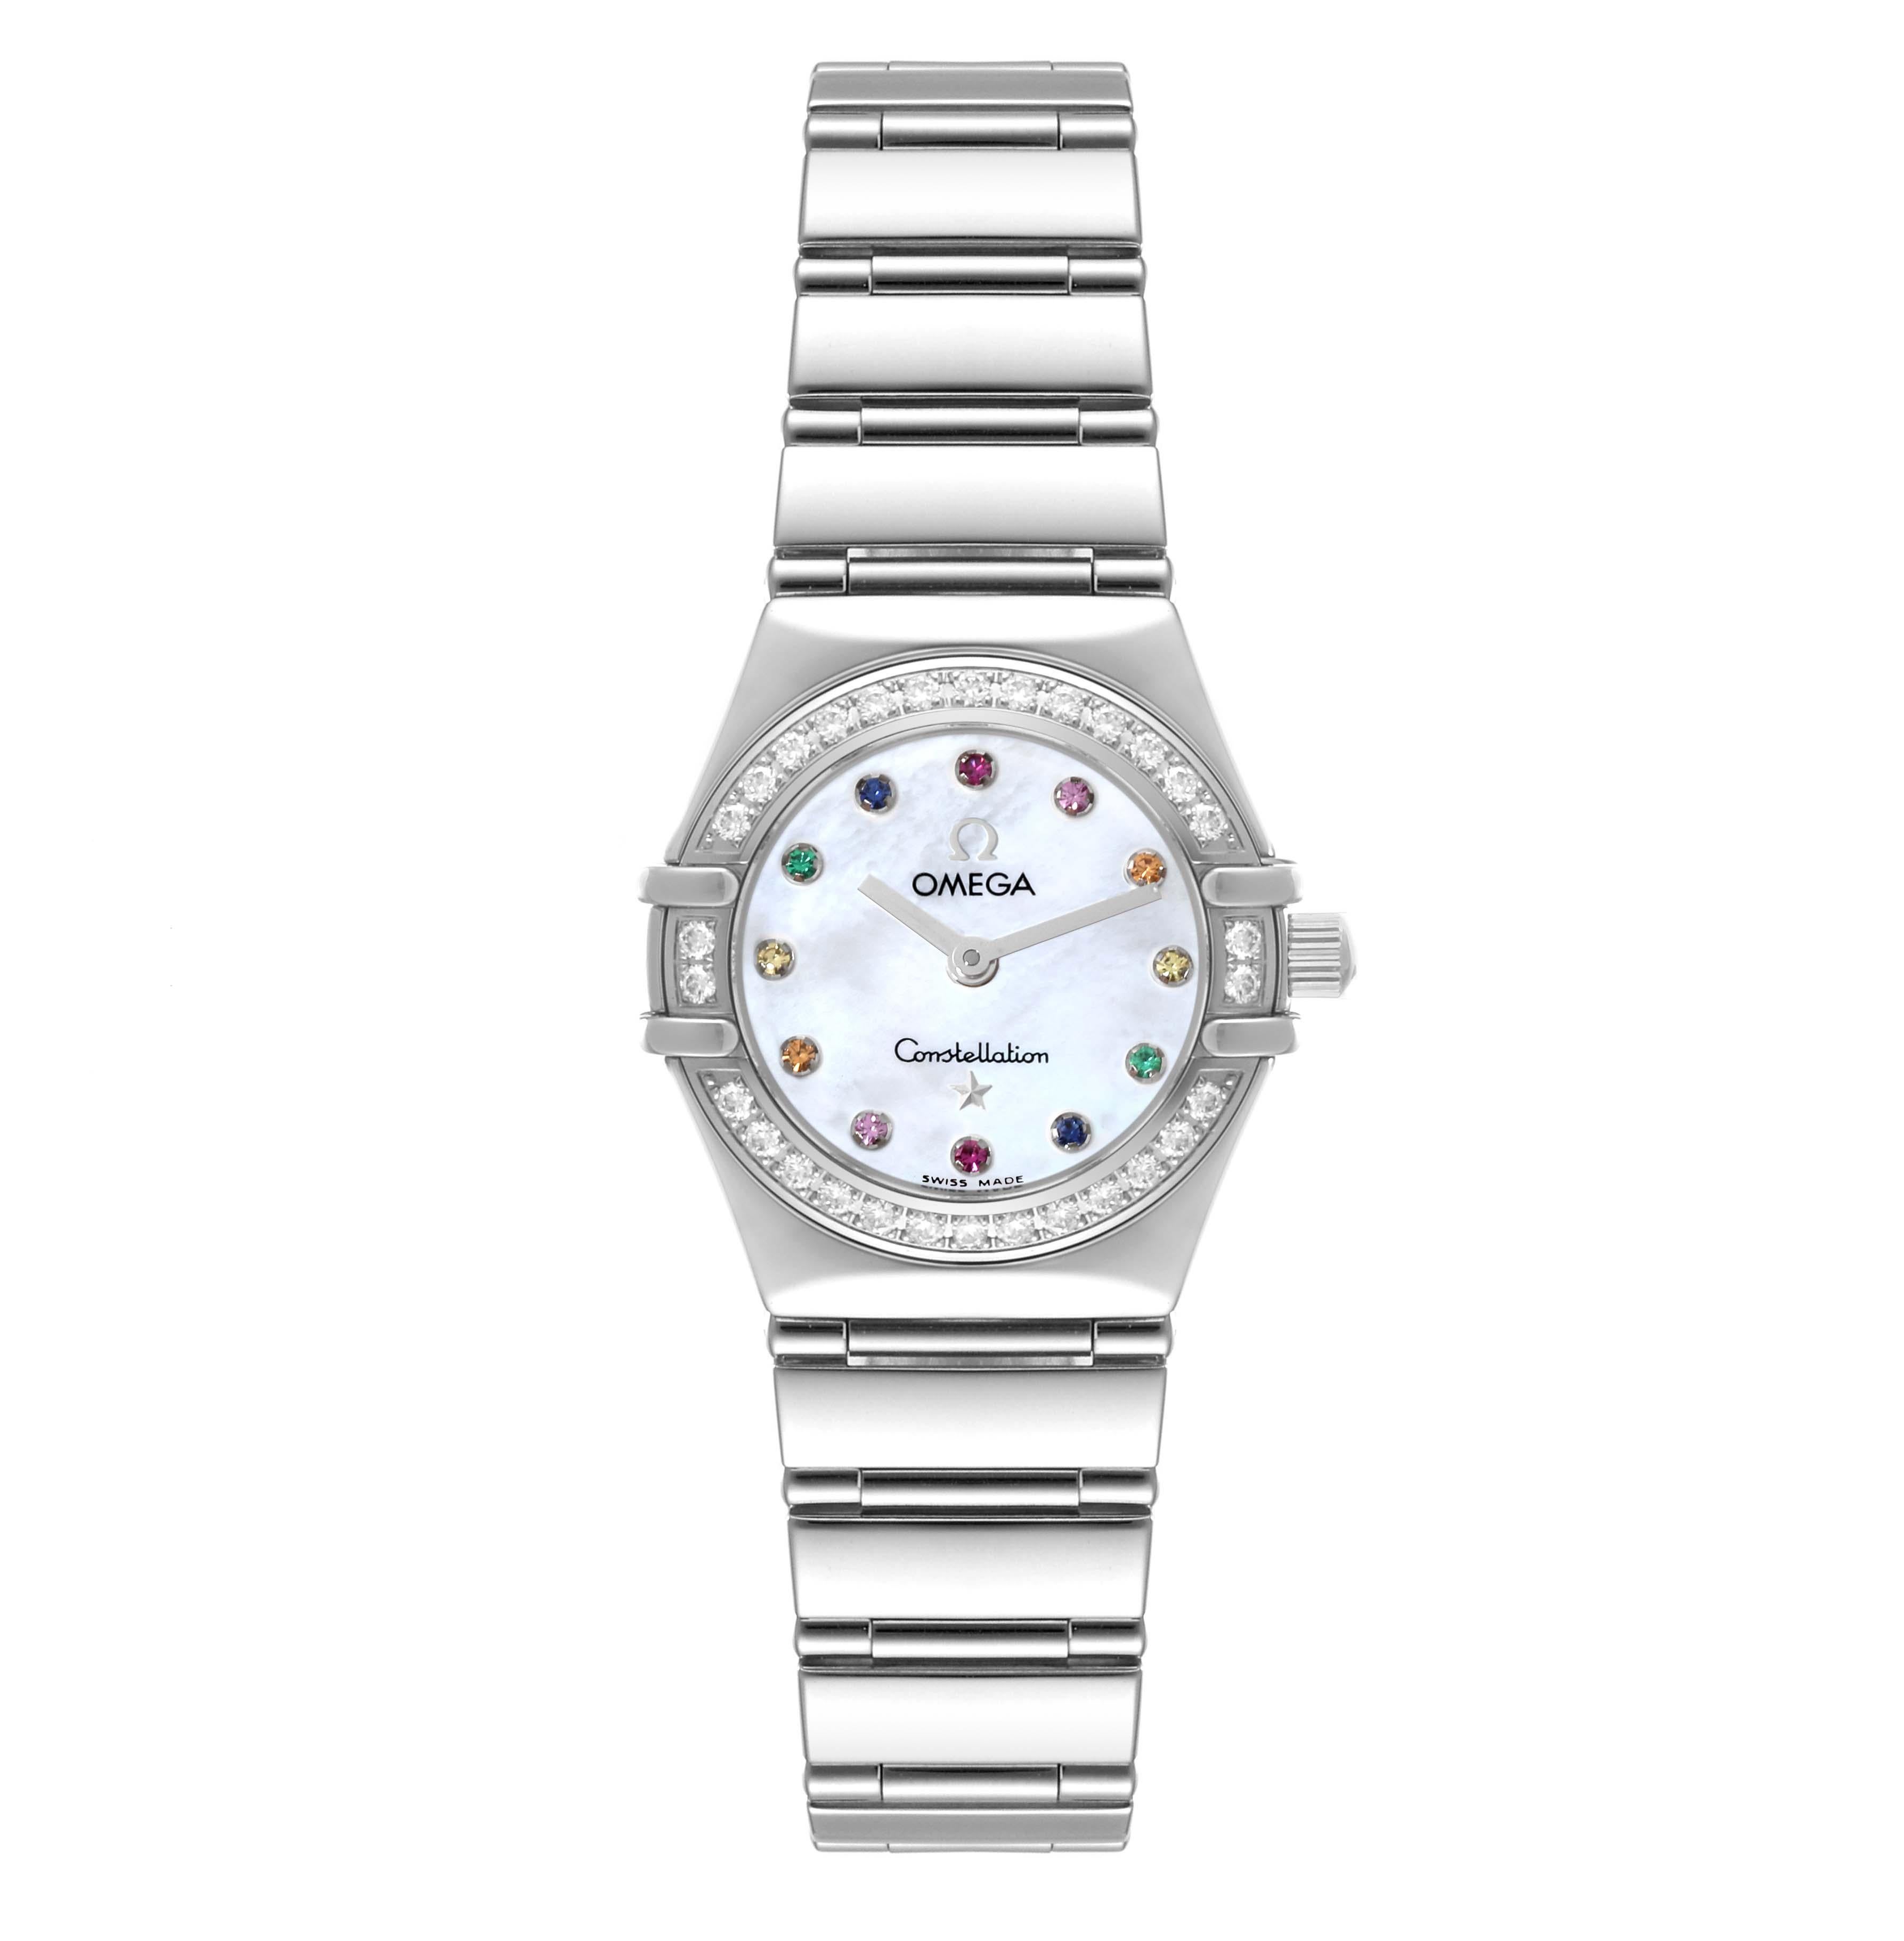 Omega Constellation Iris Steel Multi Stone Mother Of Pearl Dial Ladies Watch 1460.79.00. Quartz movement. Stainless steel round case 22.5 mm in diameter. Original Omega factory diamond bezel. Scratch resistant sapphire crystal. Mother-of-pearl dial